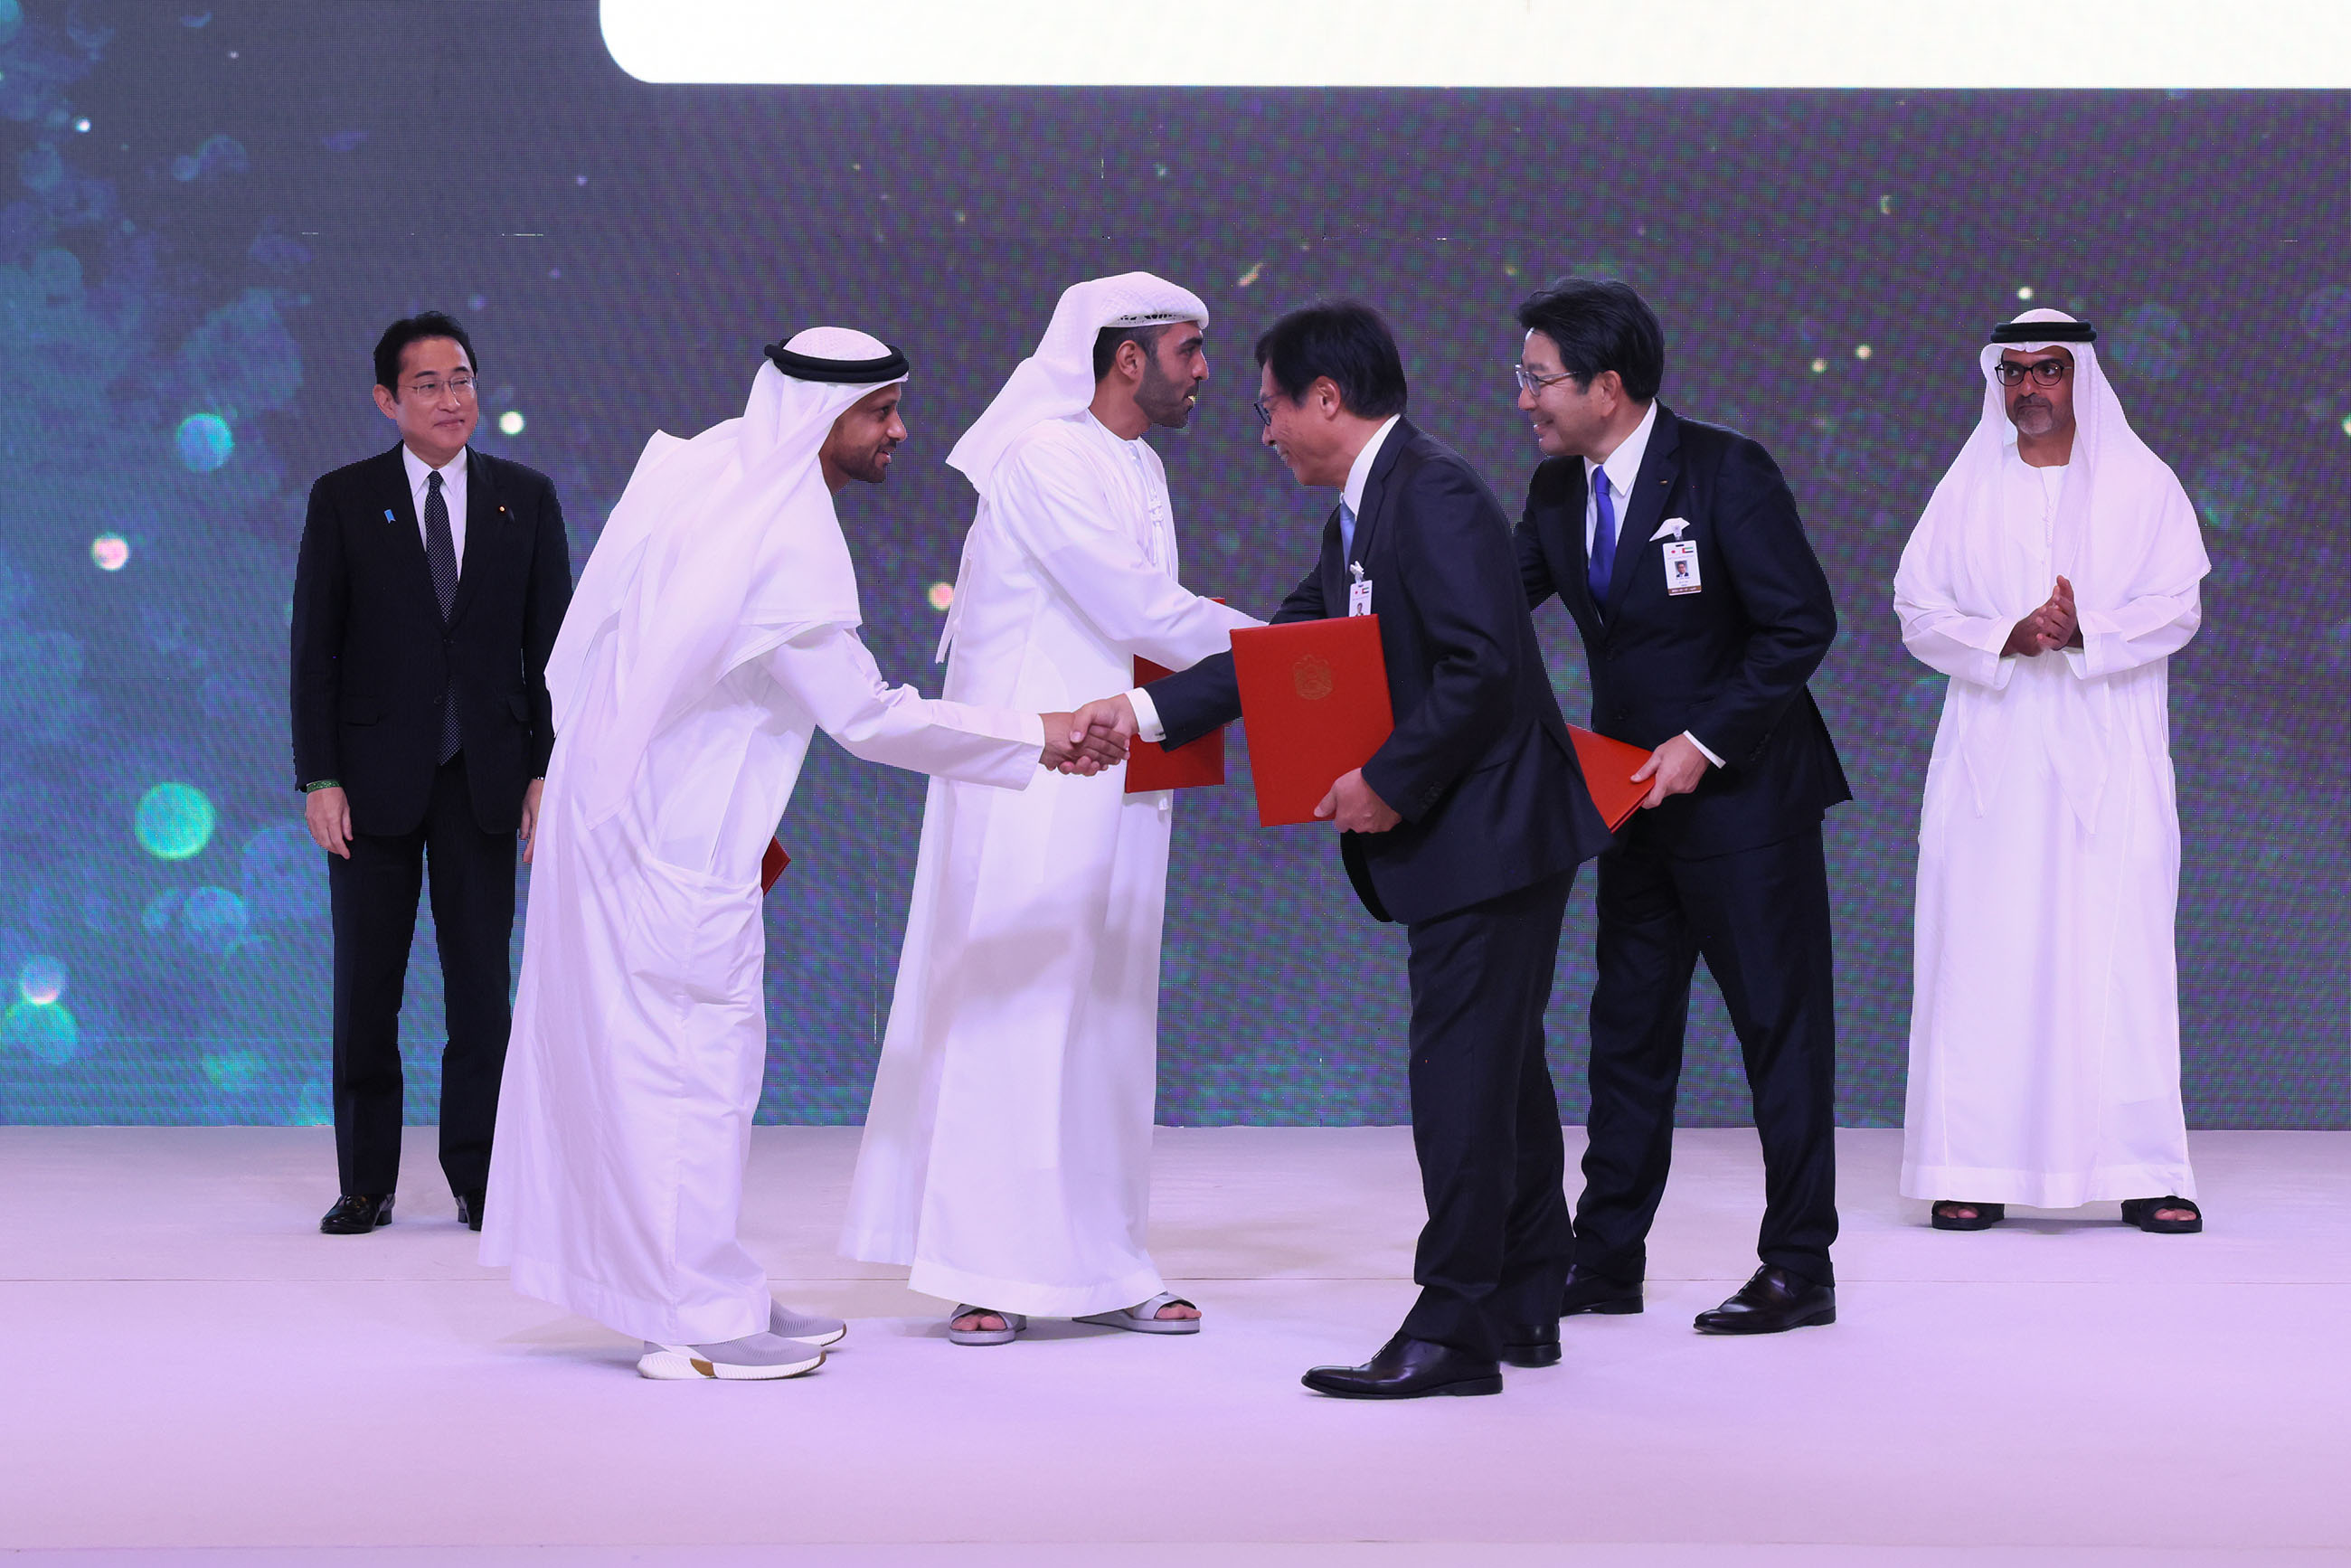 Ceremony to exchange documents at the Japan-UAE Business Forum (14)